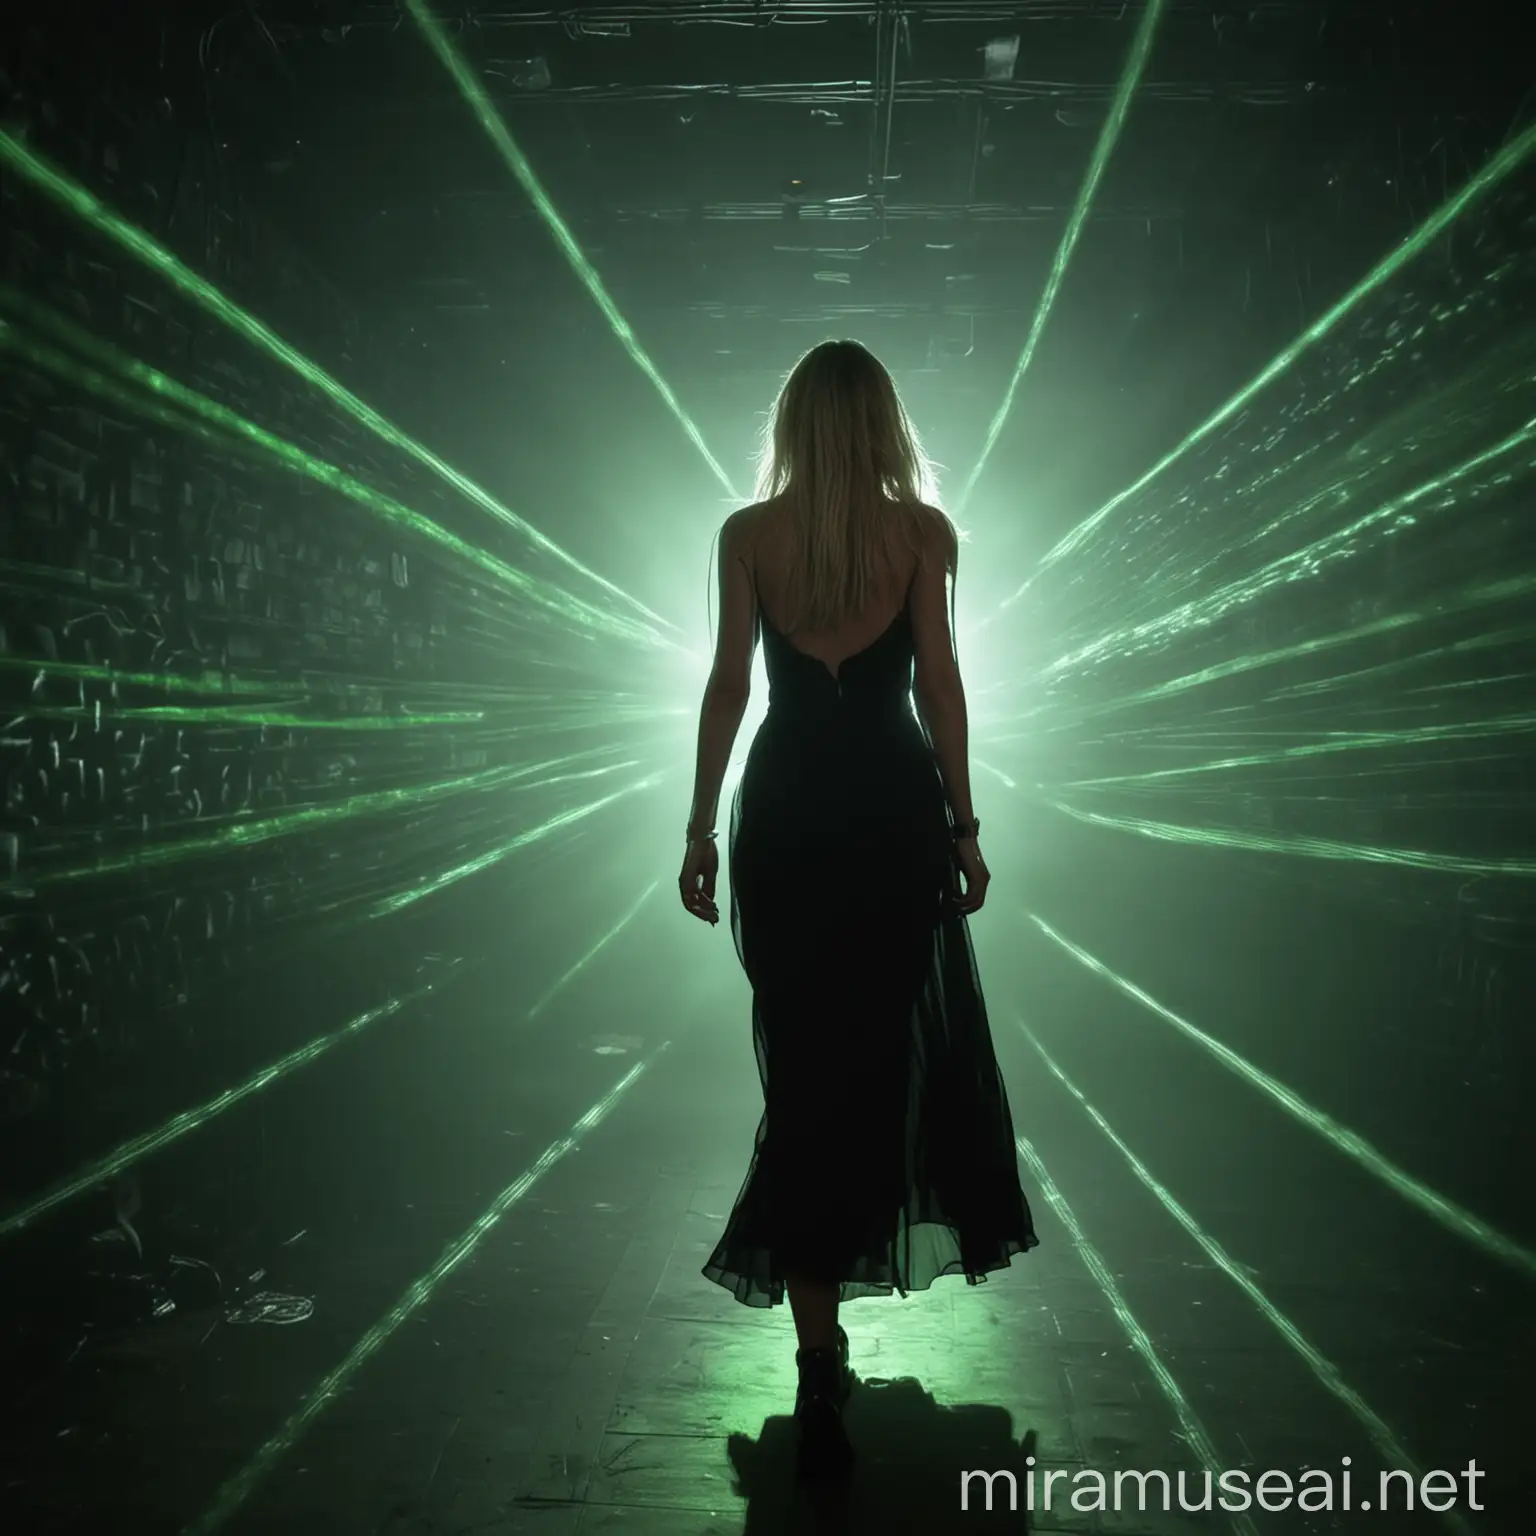 Blonde girl in a black dress walking with her back turned under the green laser lights in the dark nightclub.